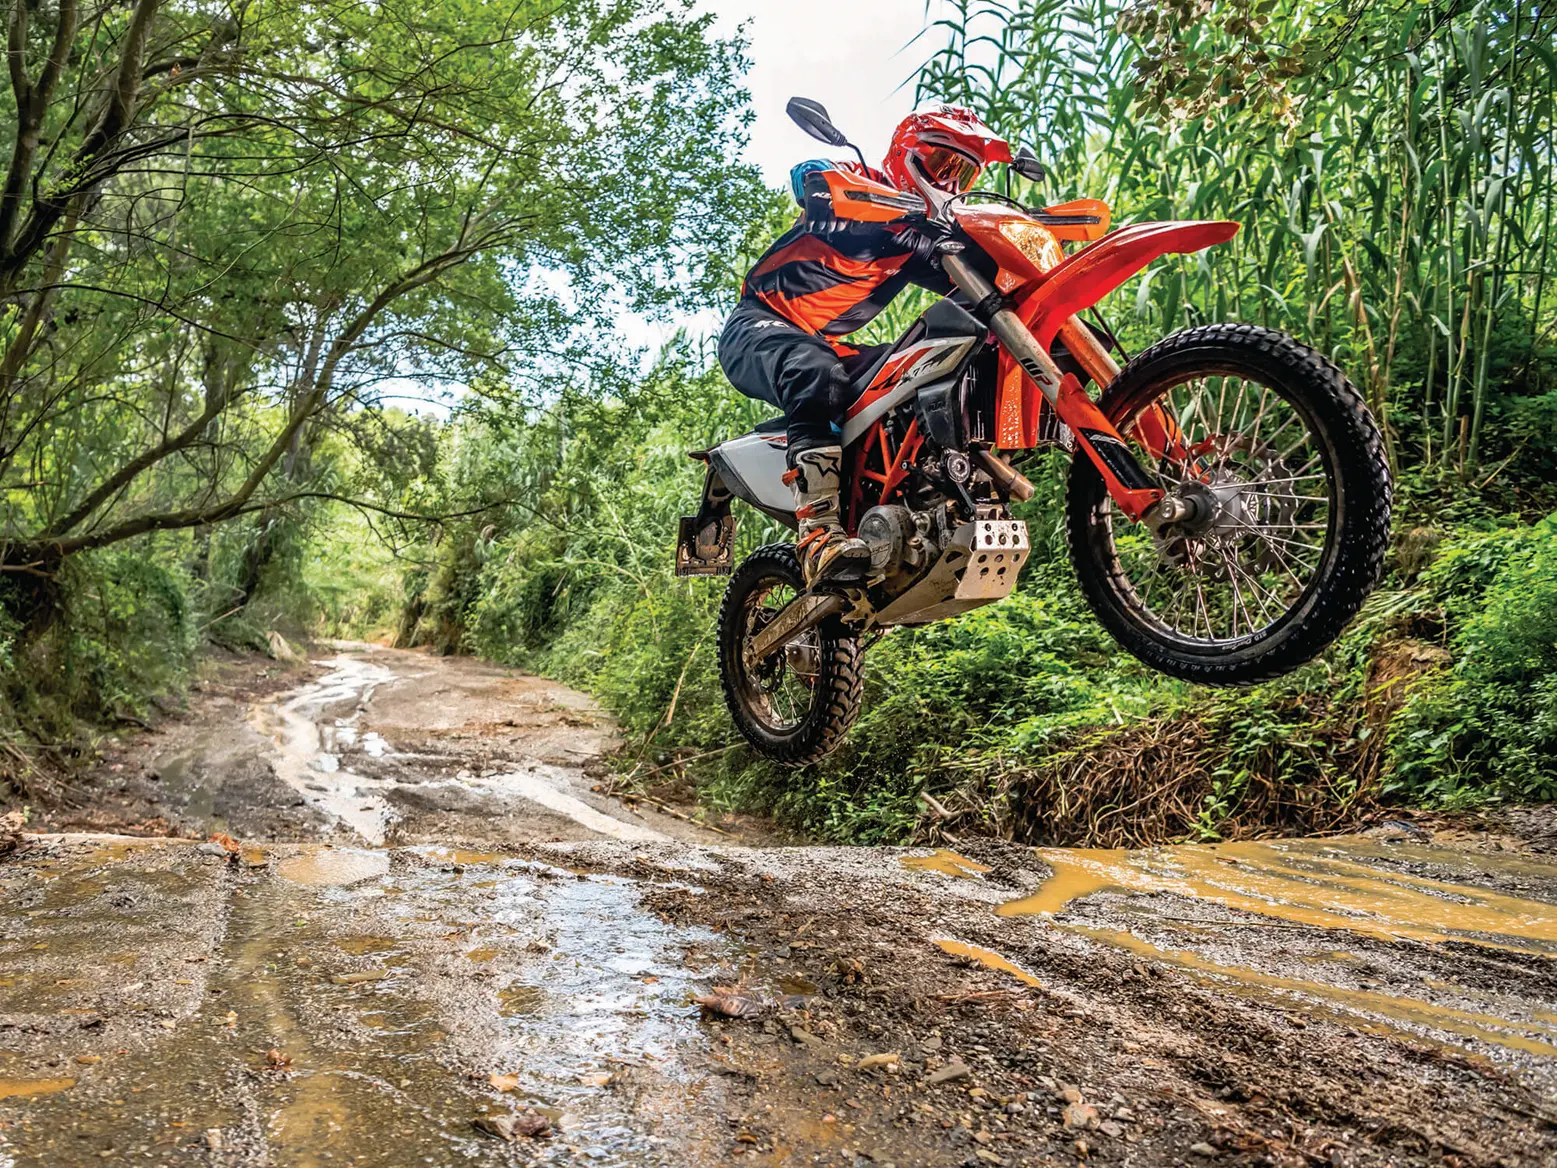  Dirt Bike Is Associated With Adventure